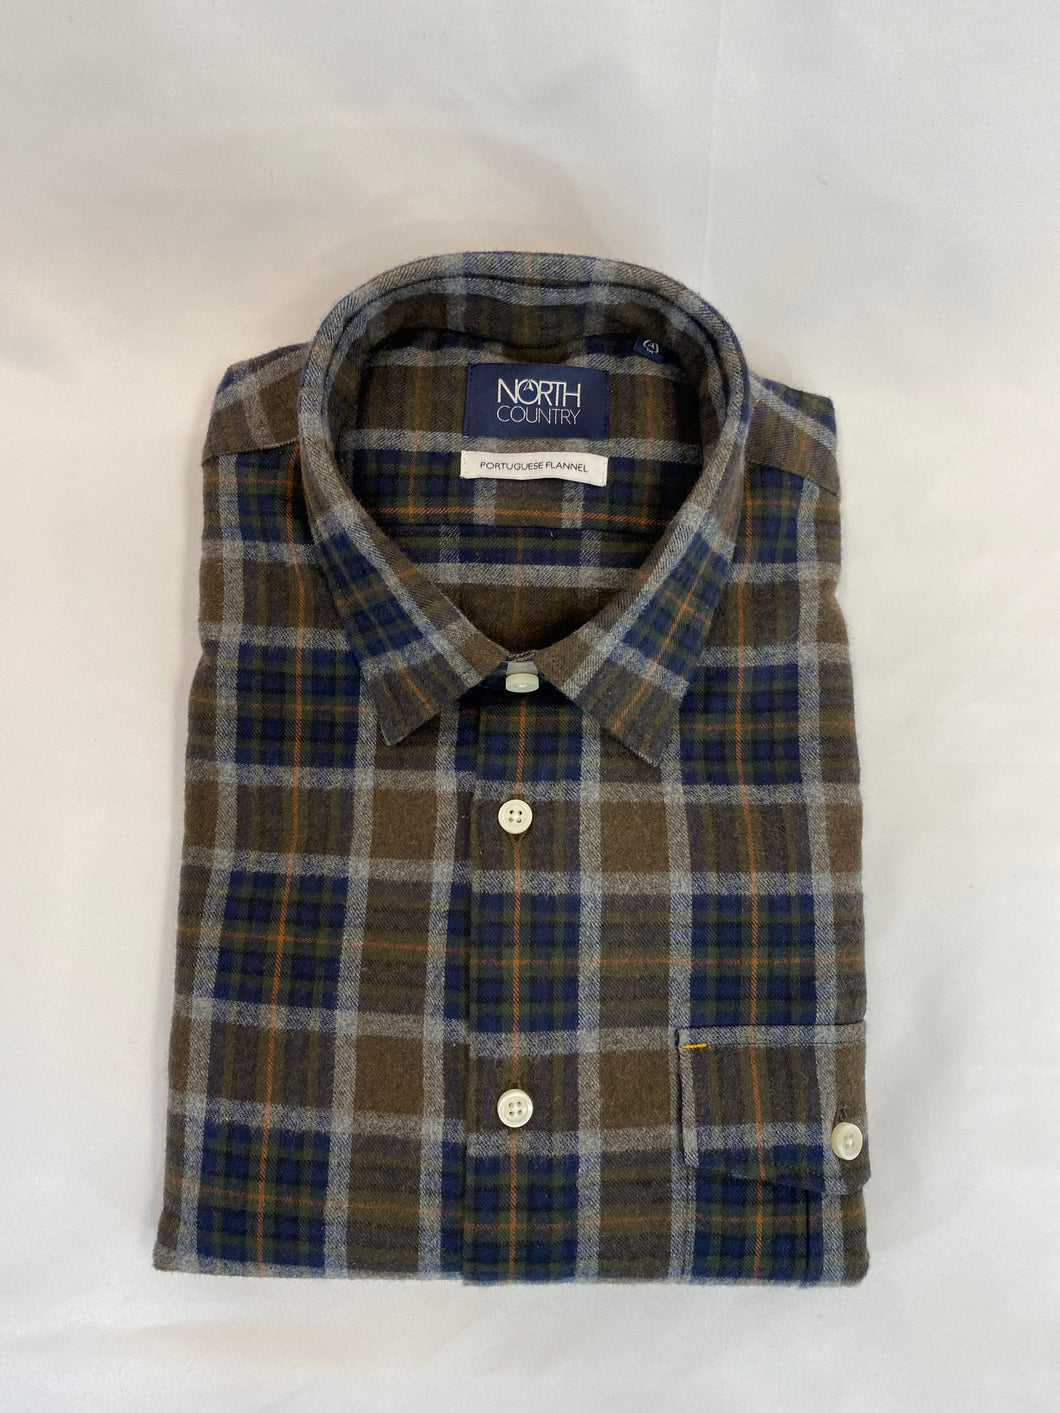 North Country Flannel Shirt Spread Collar Brown Navy Plaid